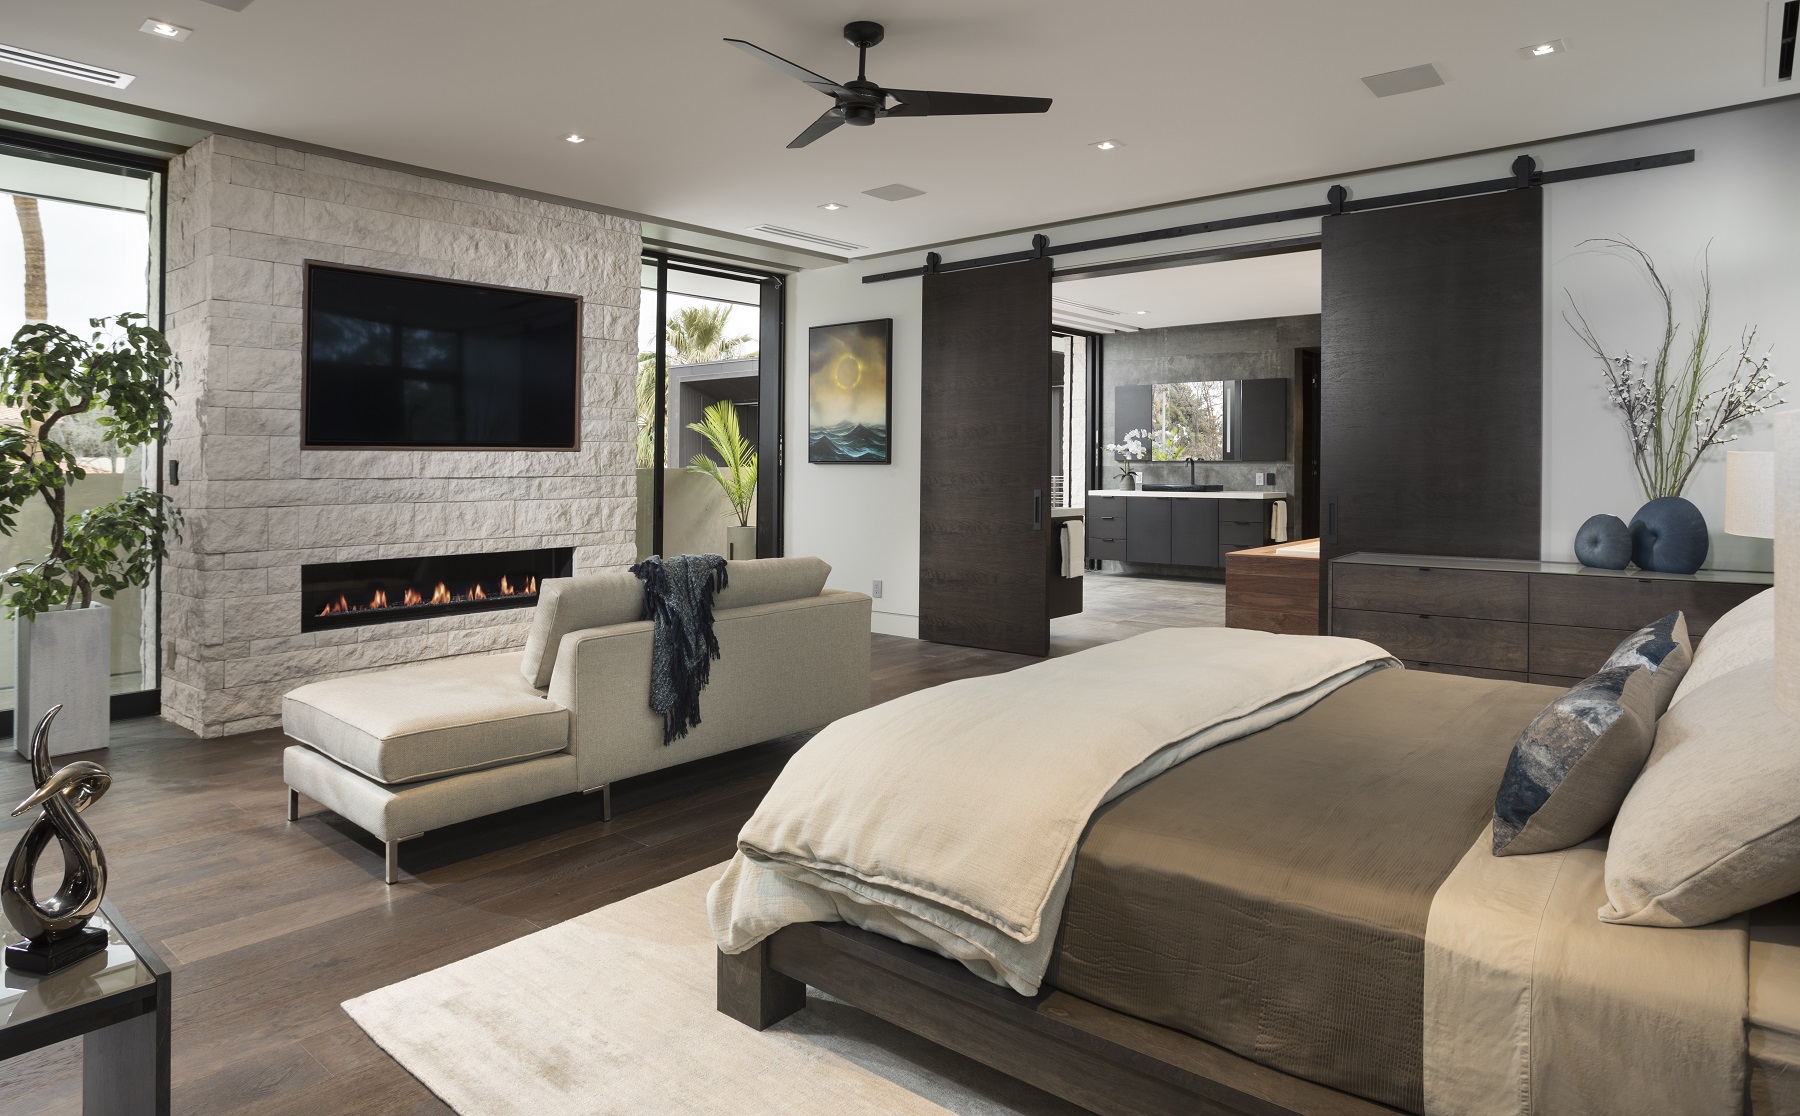 2019 The New American Remodel Bedroom fireplace